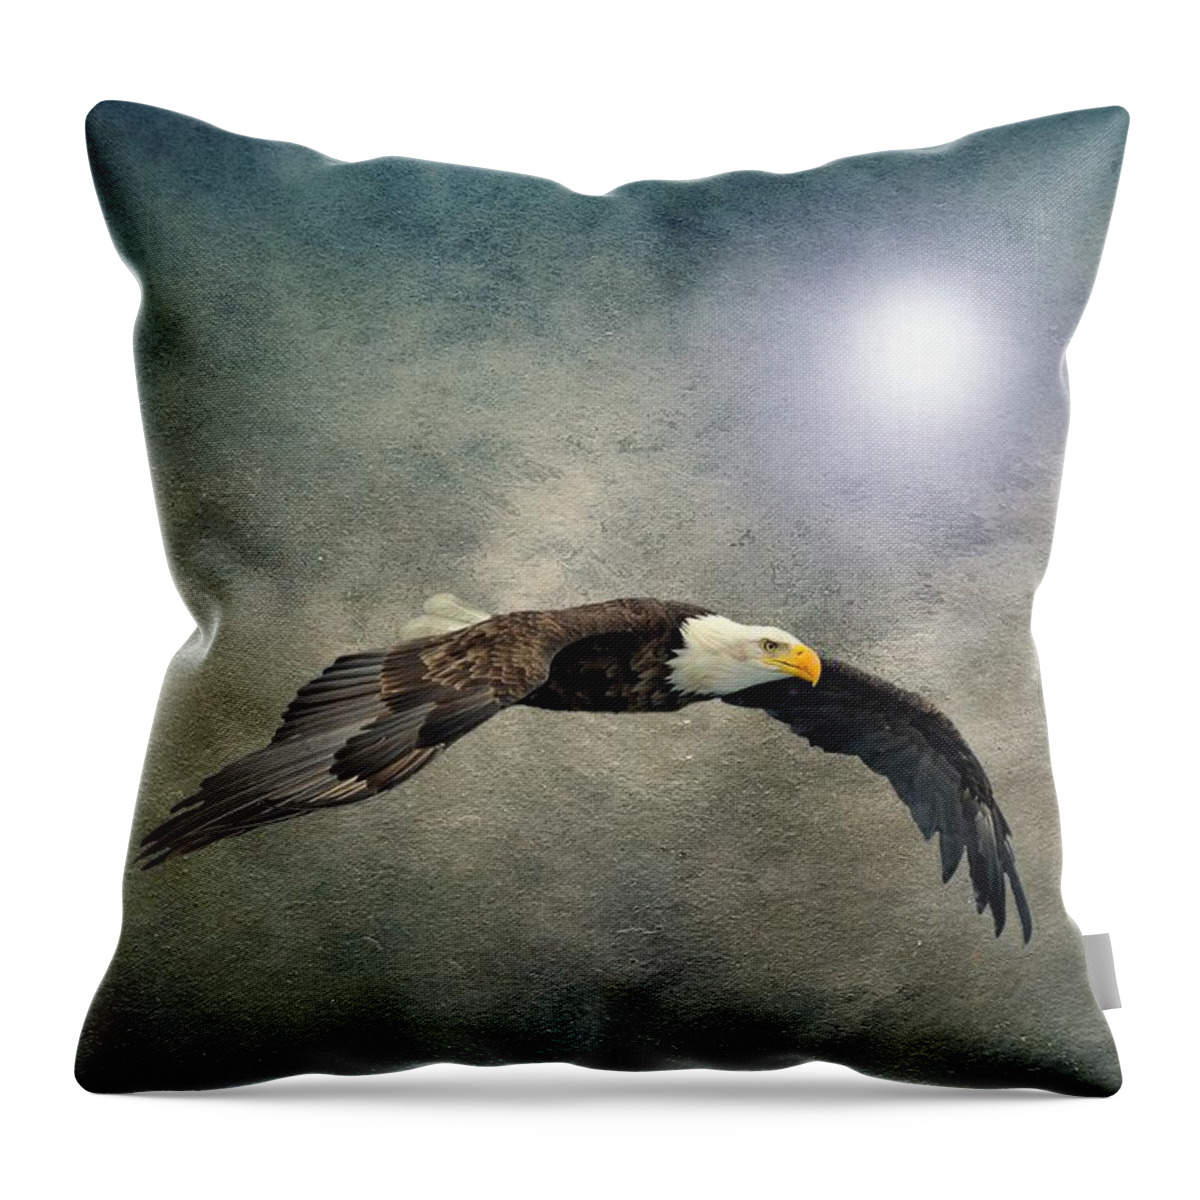 Eagle Throw Pillow featuring the photograph Bald Eagle Textured Art by David Dehner